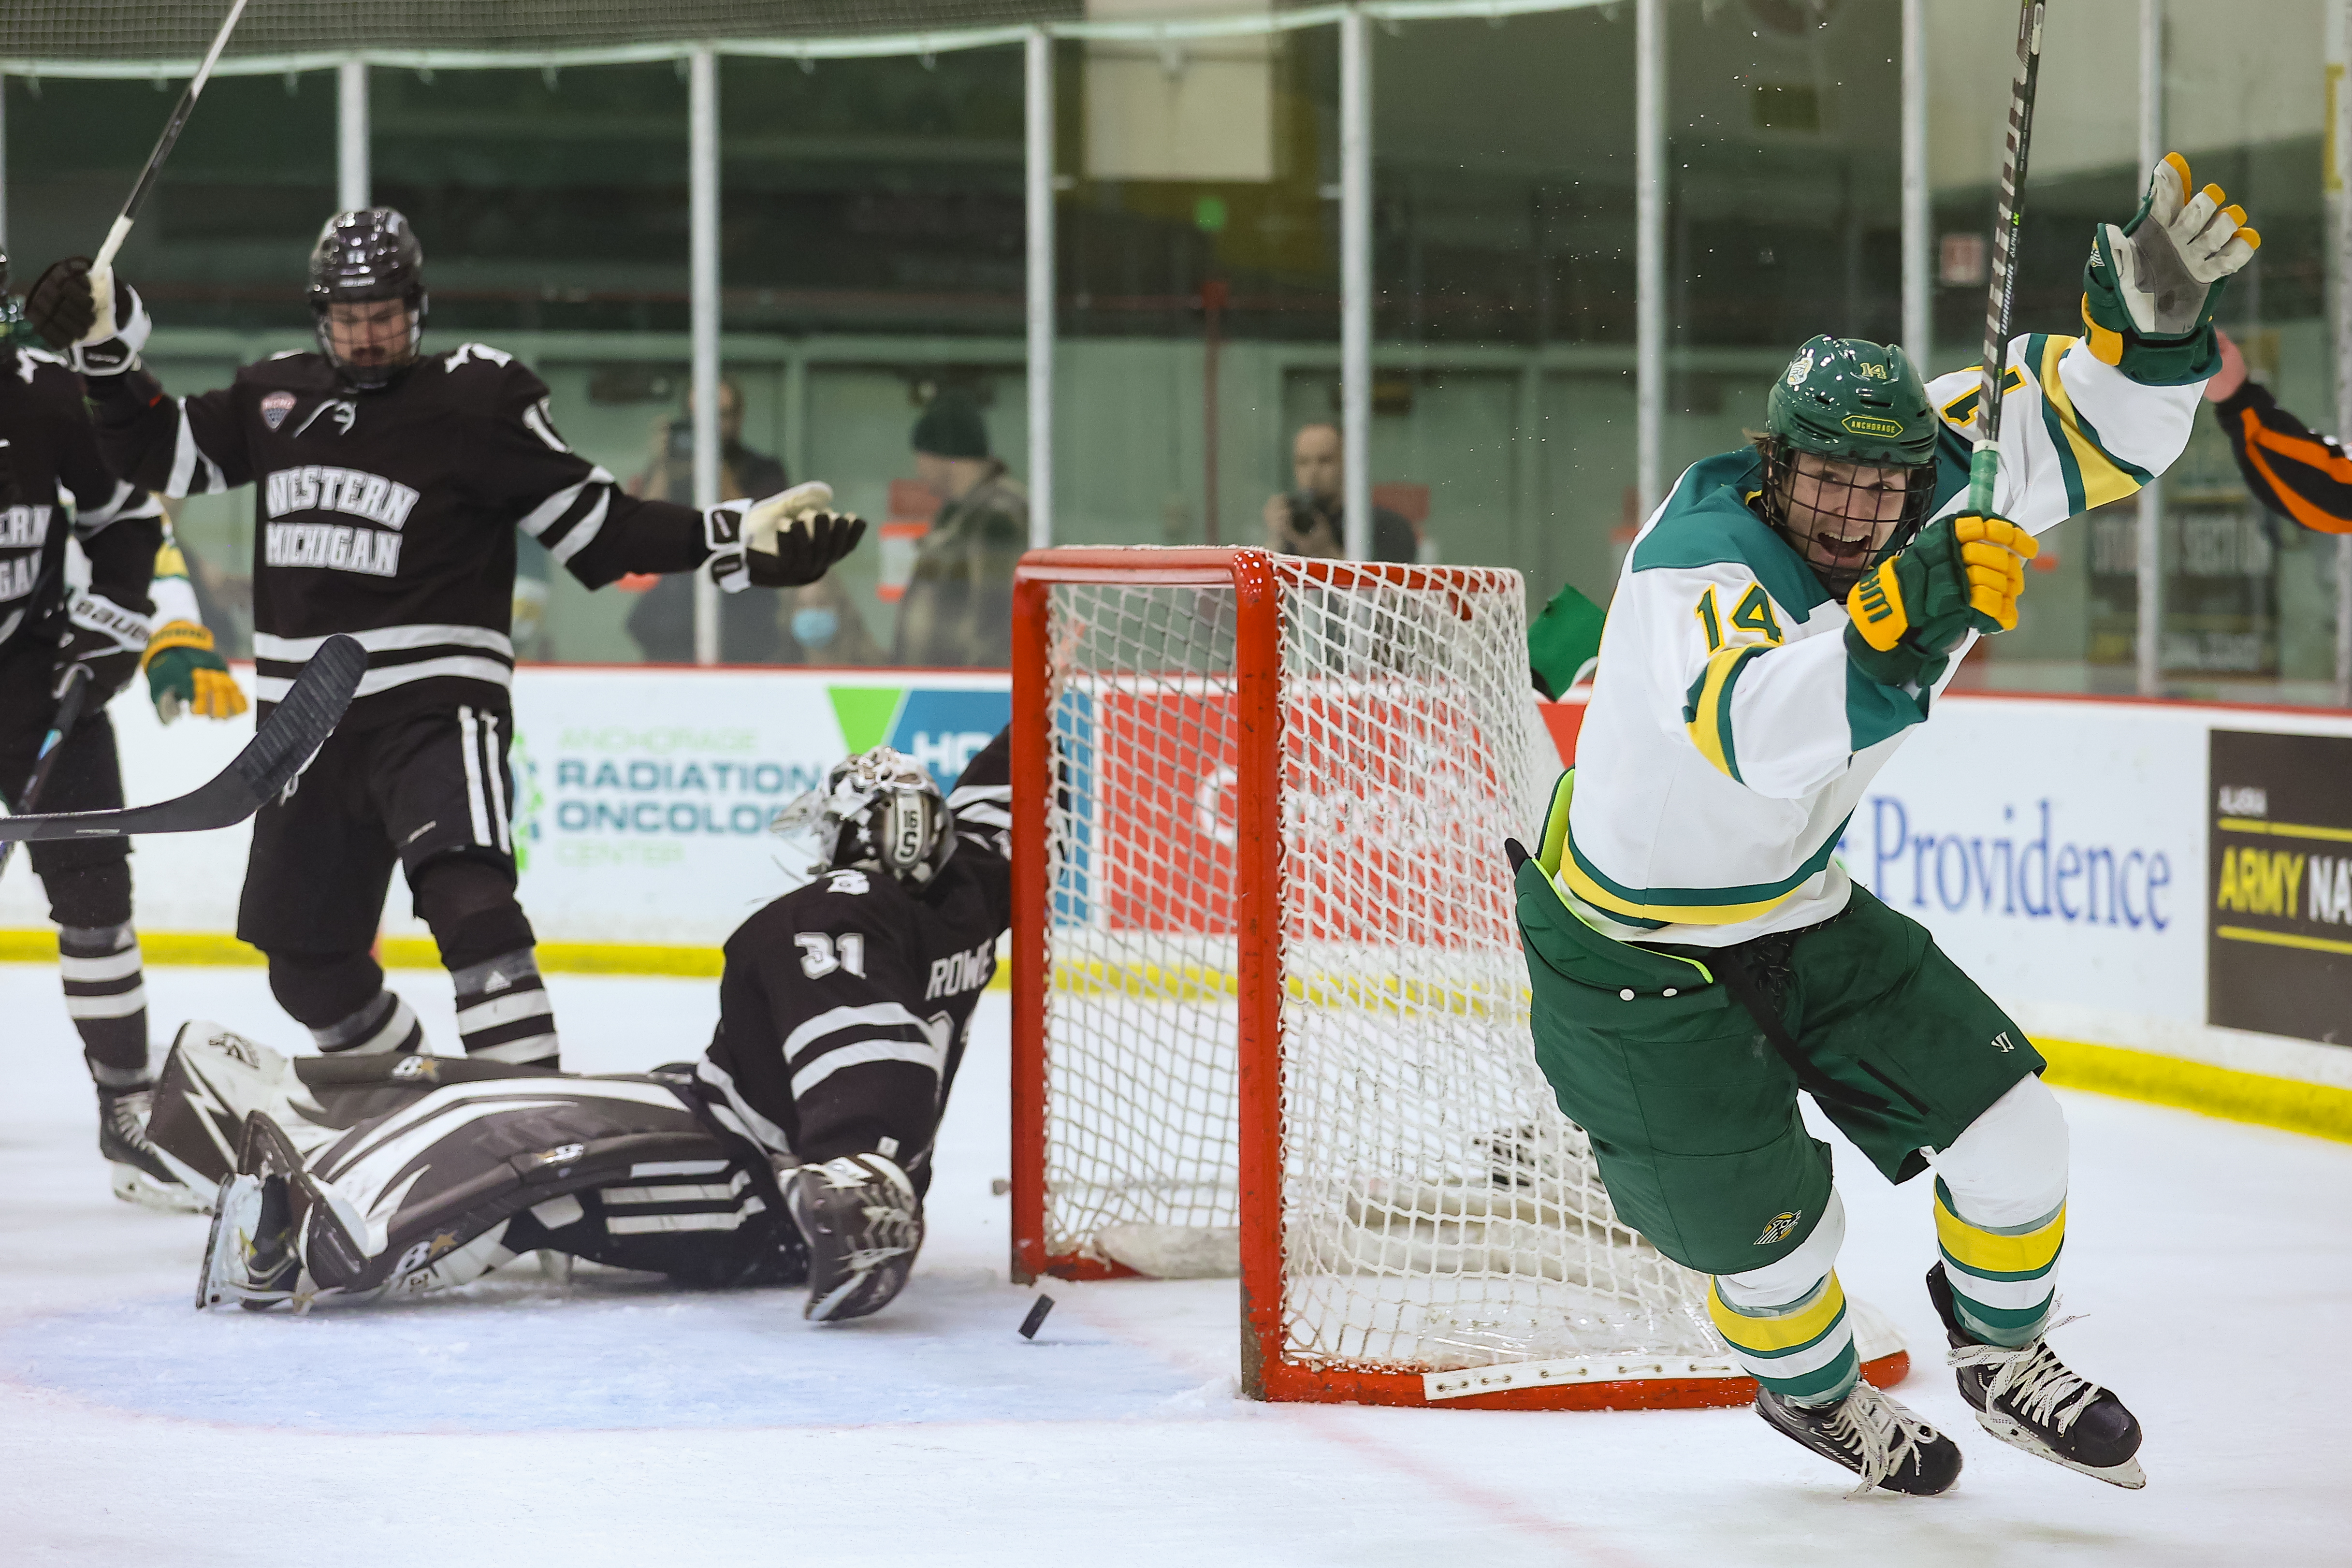 University of Anchorage hockey to play home games on campus - MIX 106